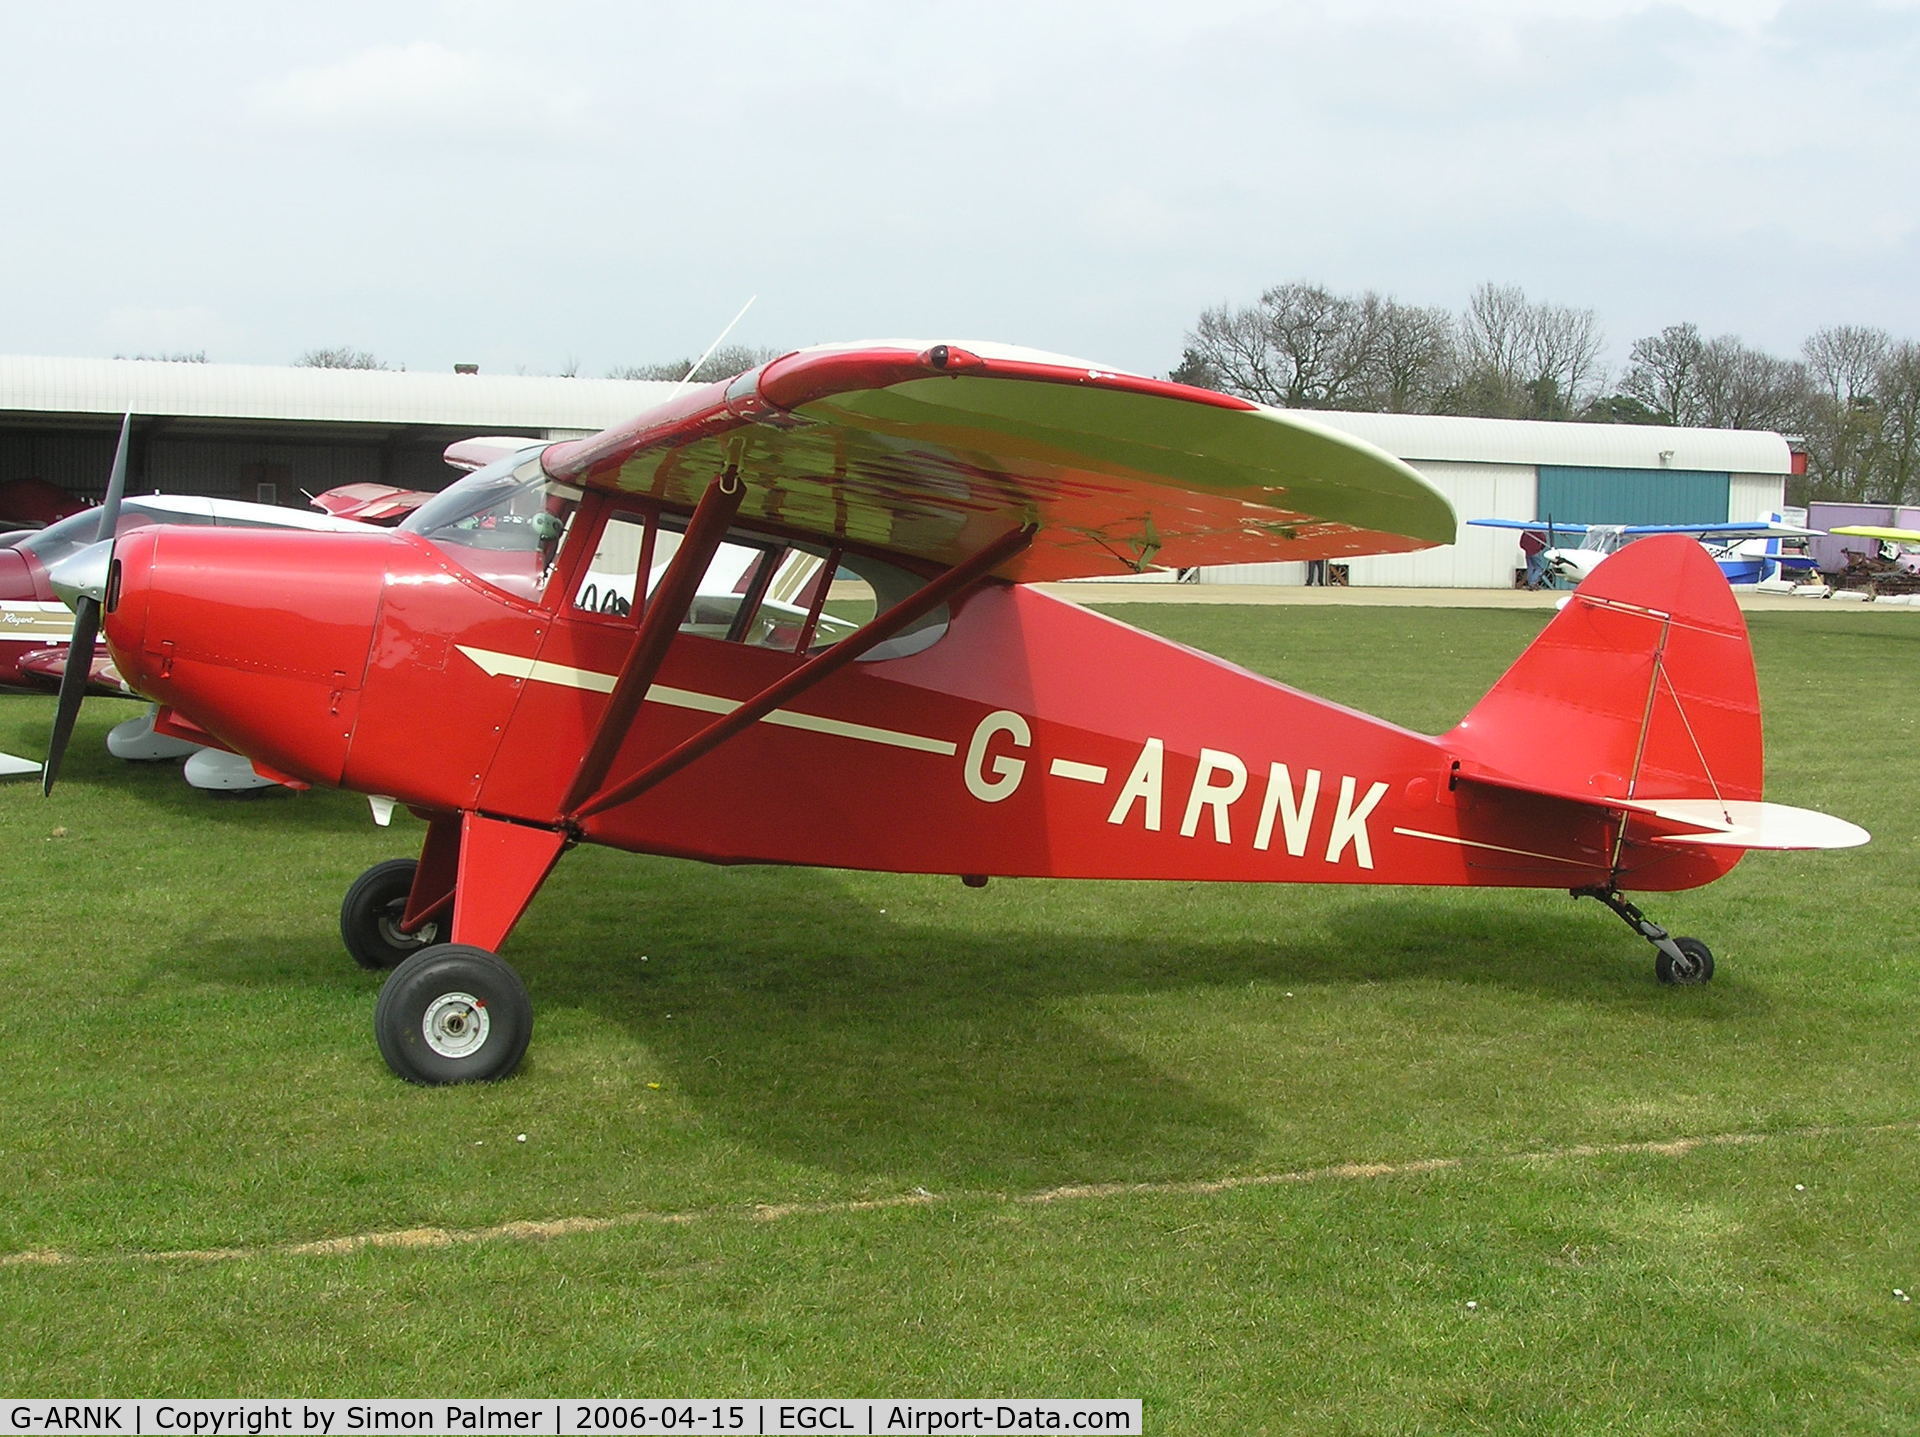 G-ARNK, 1961 Piper PA-22-108 Colt Colt C/N 22-8622, Piper PA-22 converted as taildragger